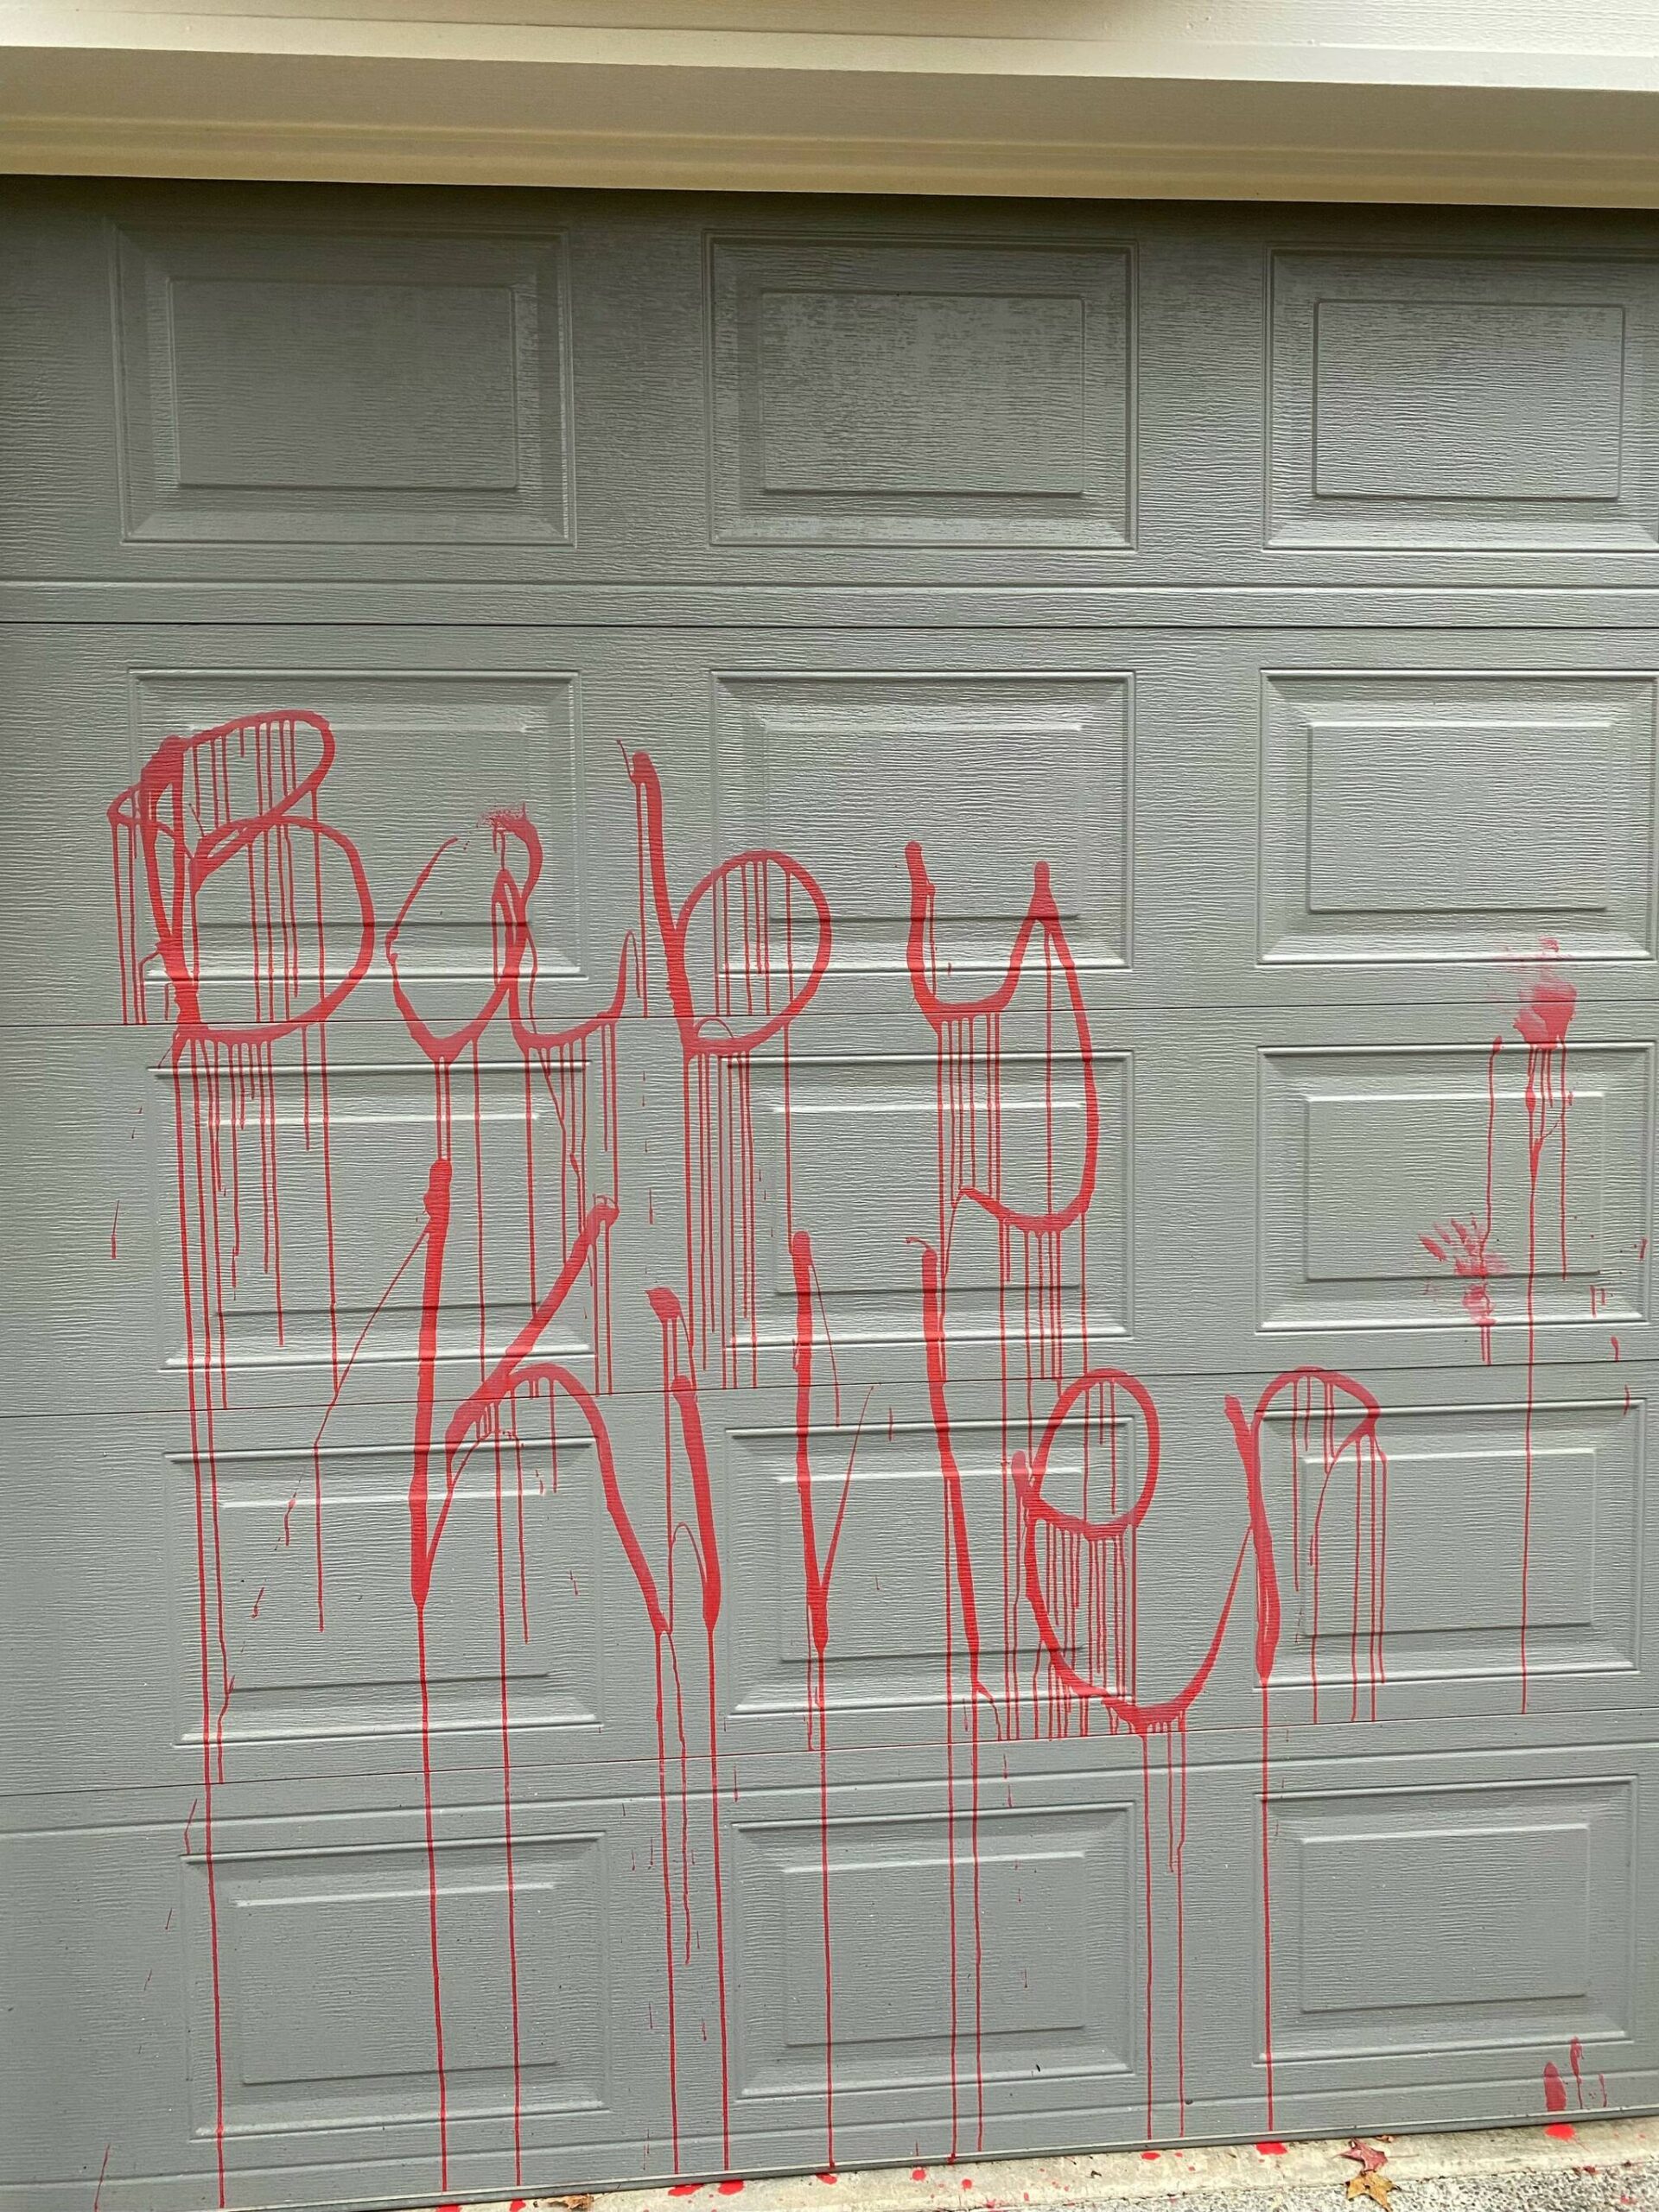 On the night of Thursday, Nov. 30 in Bellevue, people who Congressman Adam Smith said were “advocating for a cease-fire in Israel and Gaza,” vandalized his garage with spray paint. (Photo Courtesy of the Office of Congressman Adam Smith)